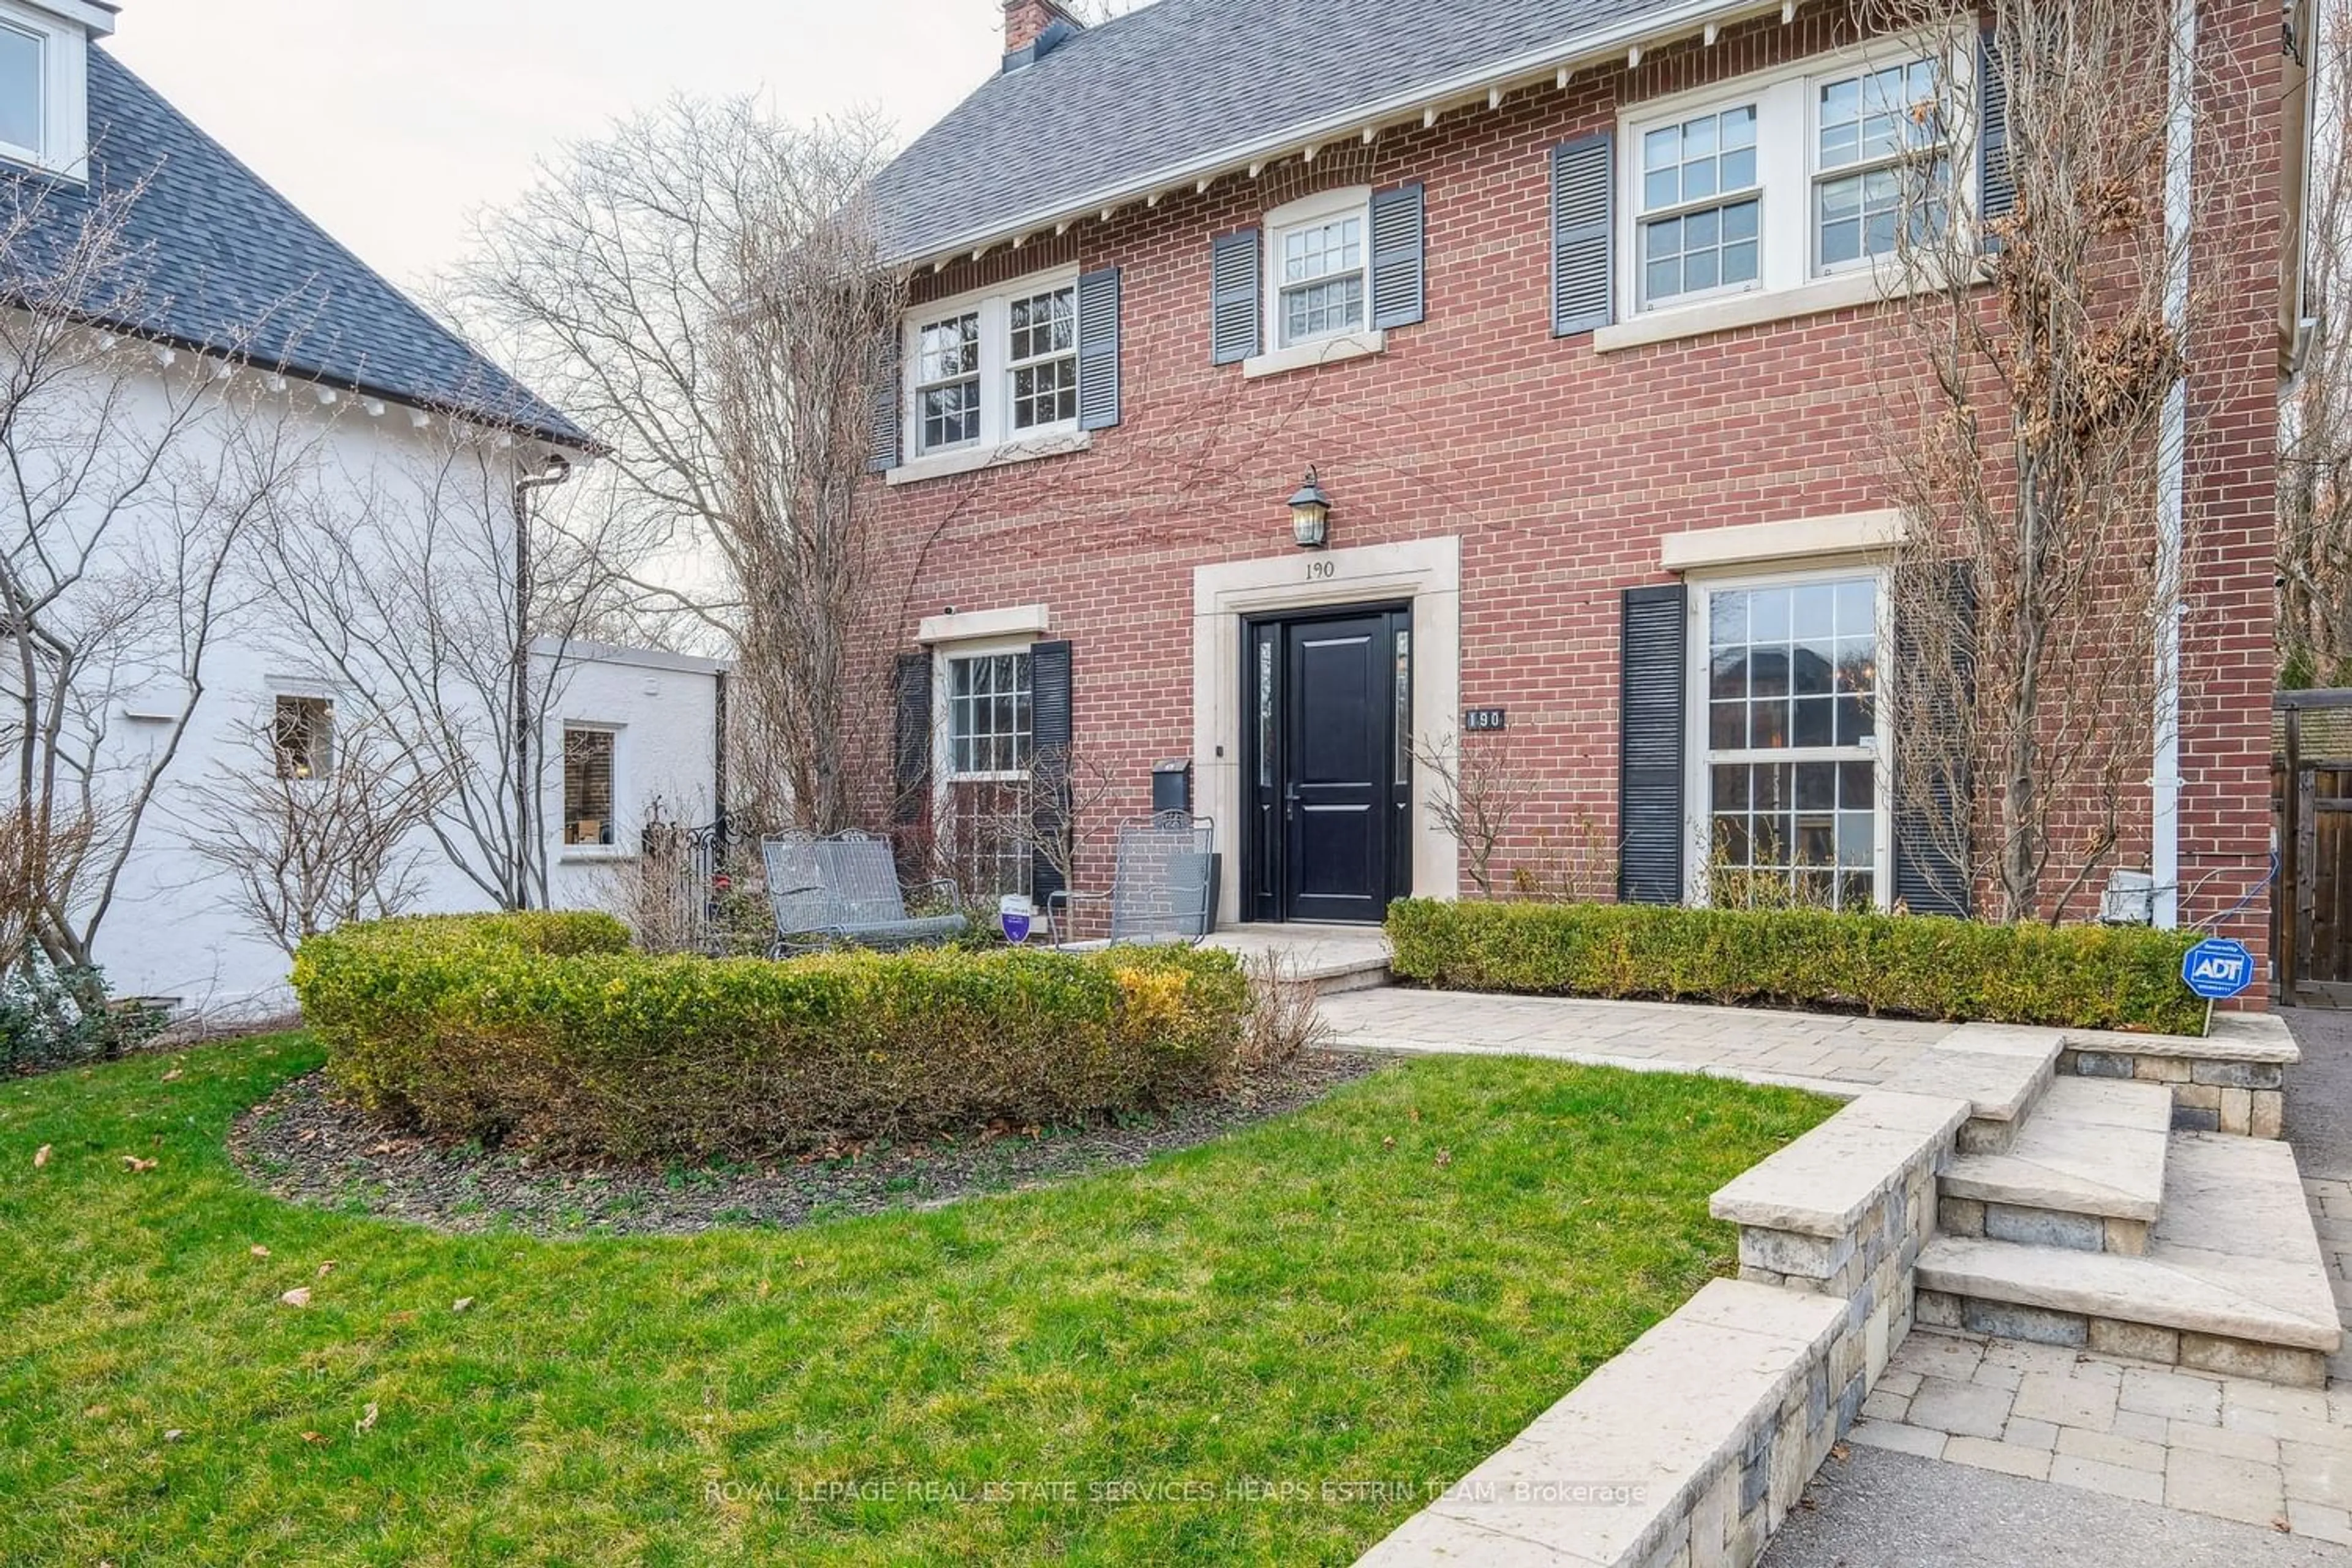 Home with brick exterior material for 190 Rosedale Heights Dr, Toronto Ontario M4T 1C9